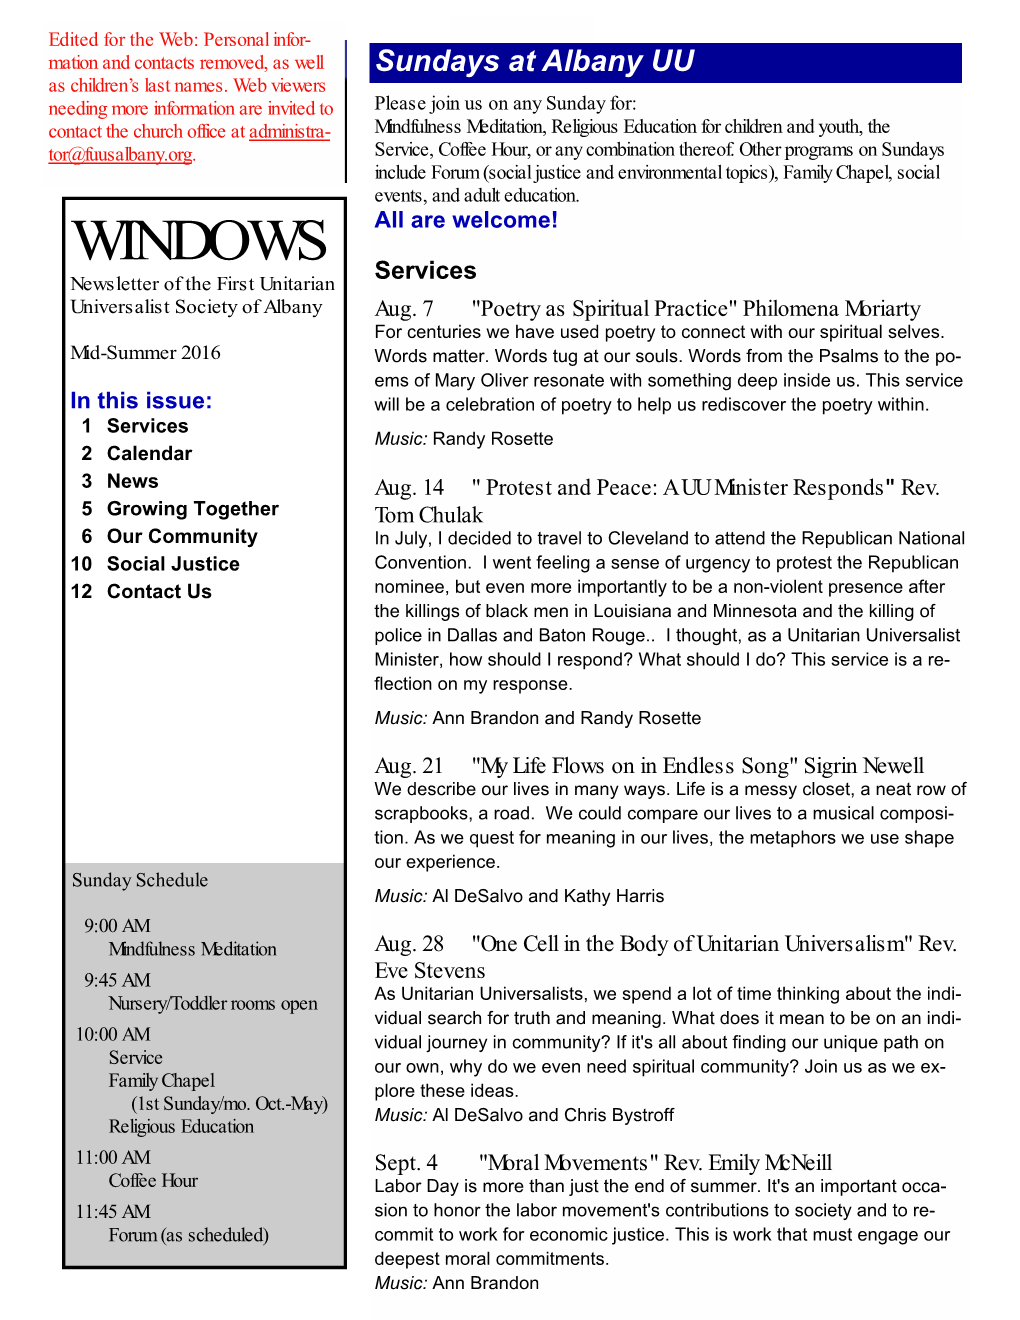 WINDOWS Services Newsletter of the First Unitarian Universalist Society of Albany Aug